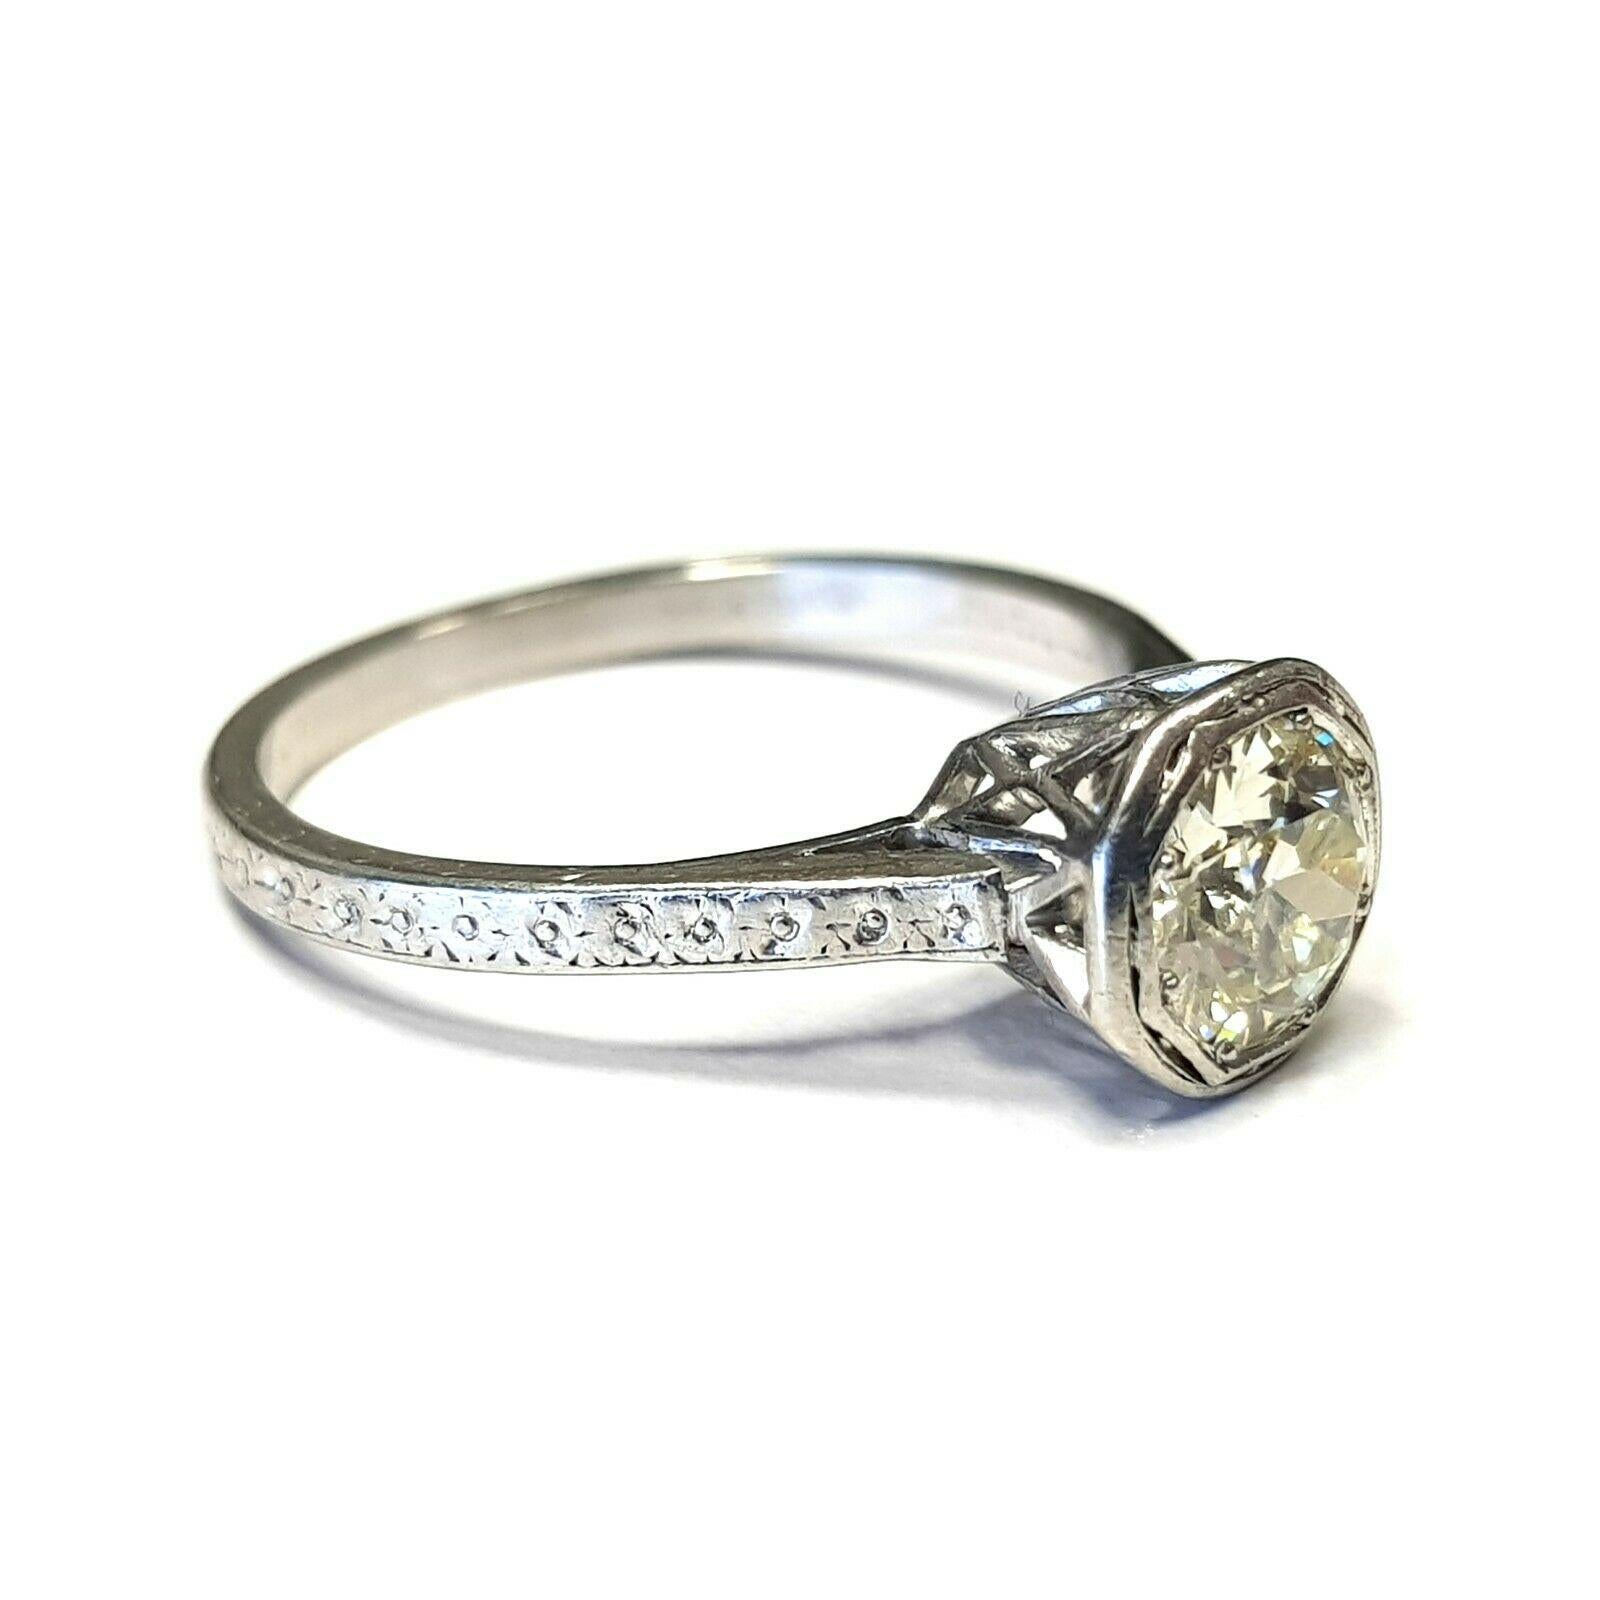  Specifications:
    main stone: OLD CUT DIAMOND 0.90CT
    additional: none
    diamonds: n/a
    carat total weight: n/a
    color: L
    clarity: VS1 
    metal: PLATINUM
    type: art deco ring
    weight: 4 gr
    size: 7.5 US
    hallmark: